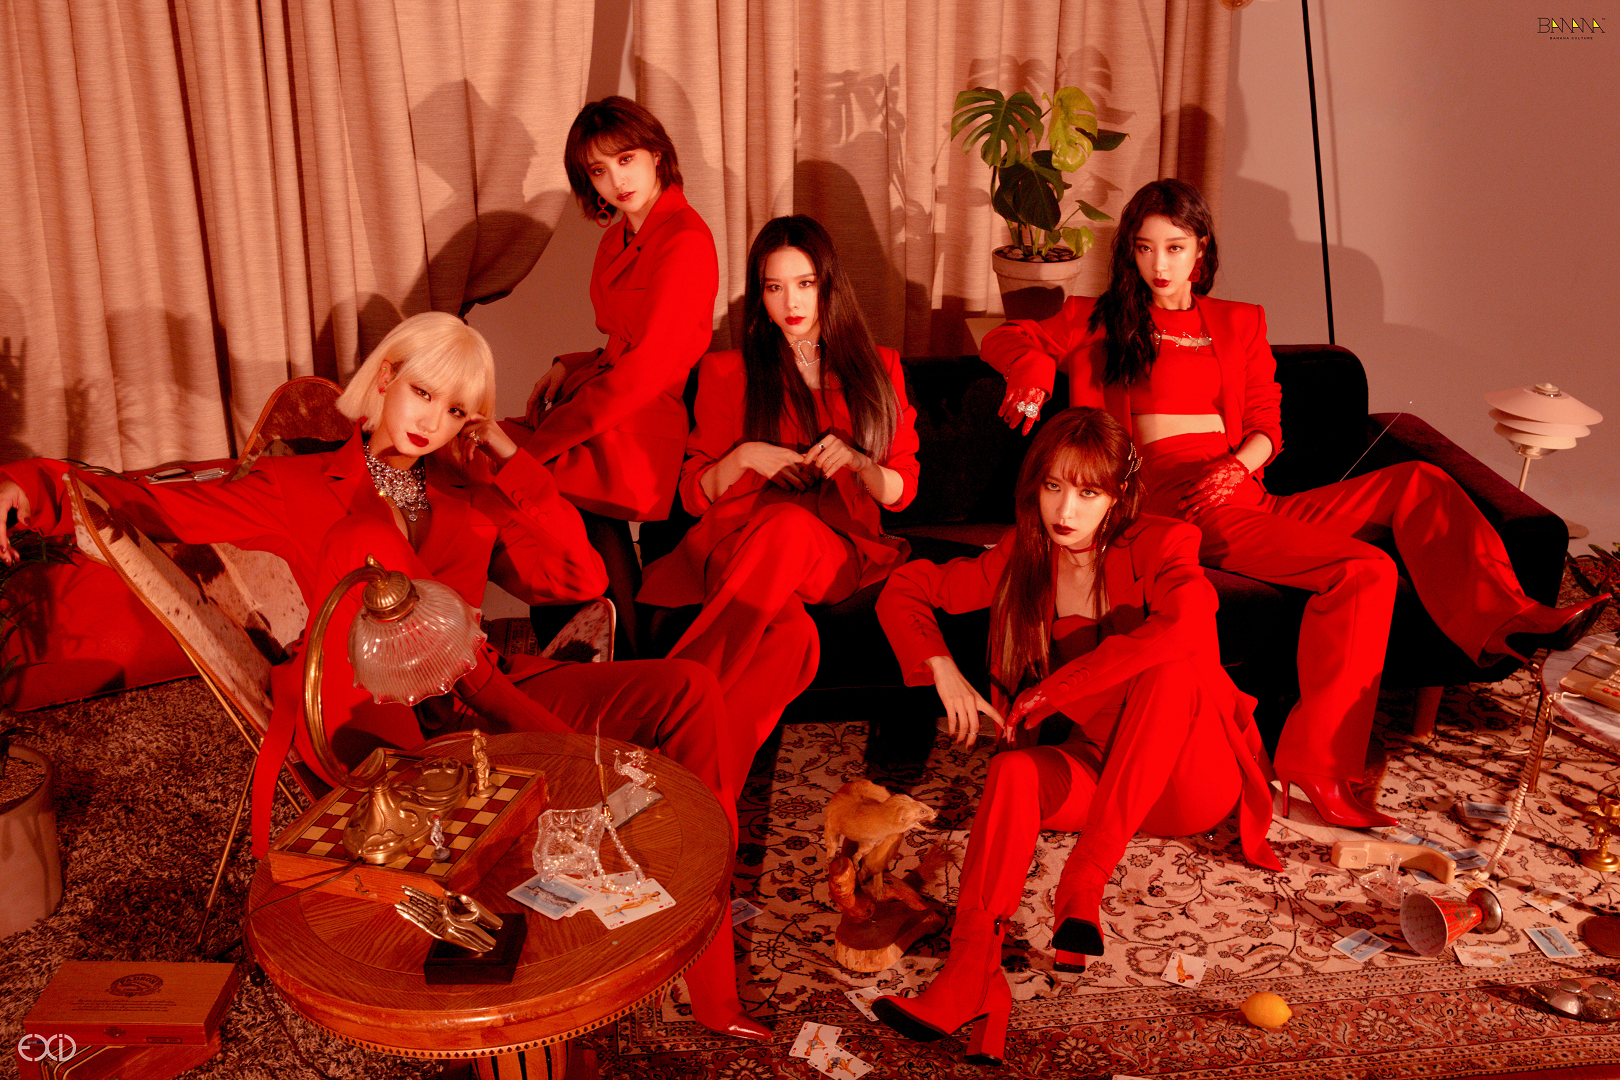 EXID Goes From Down to Up with “Up & Down” – Seoulbeats